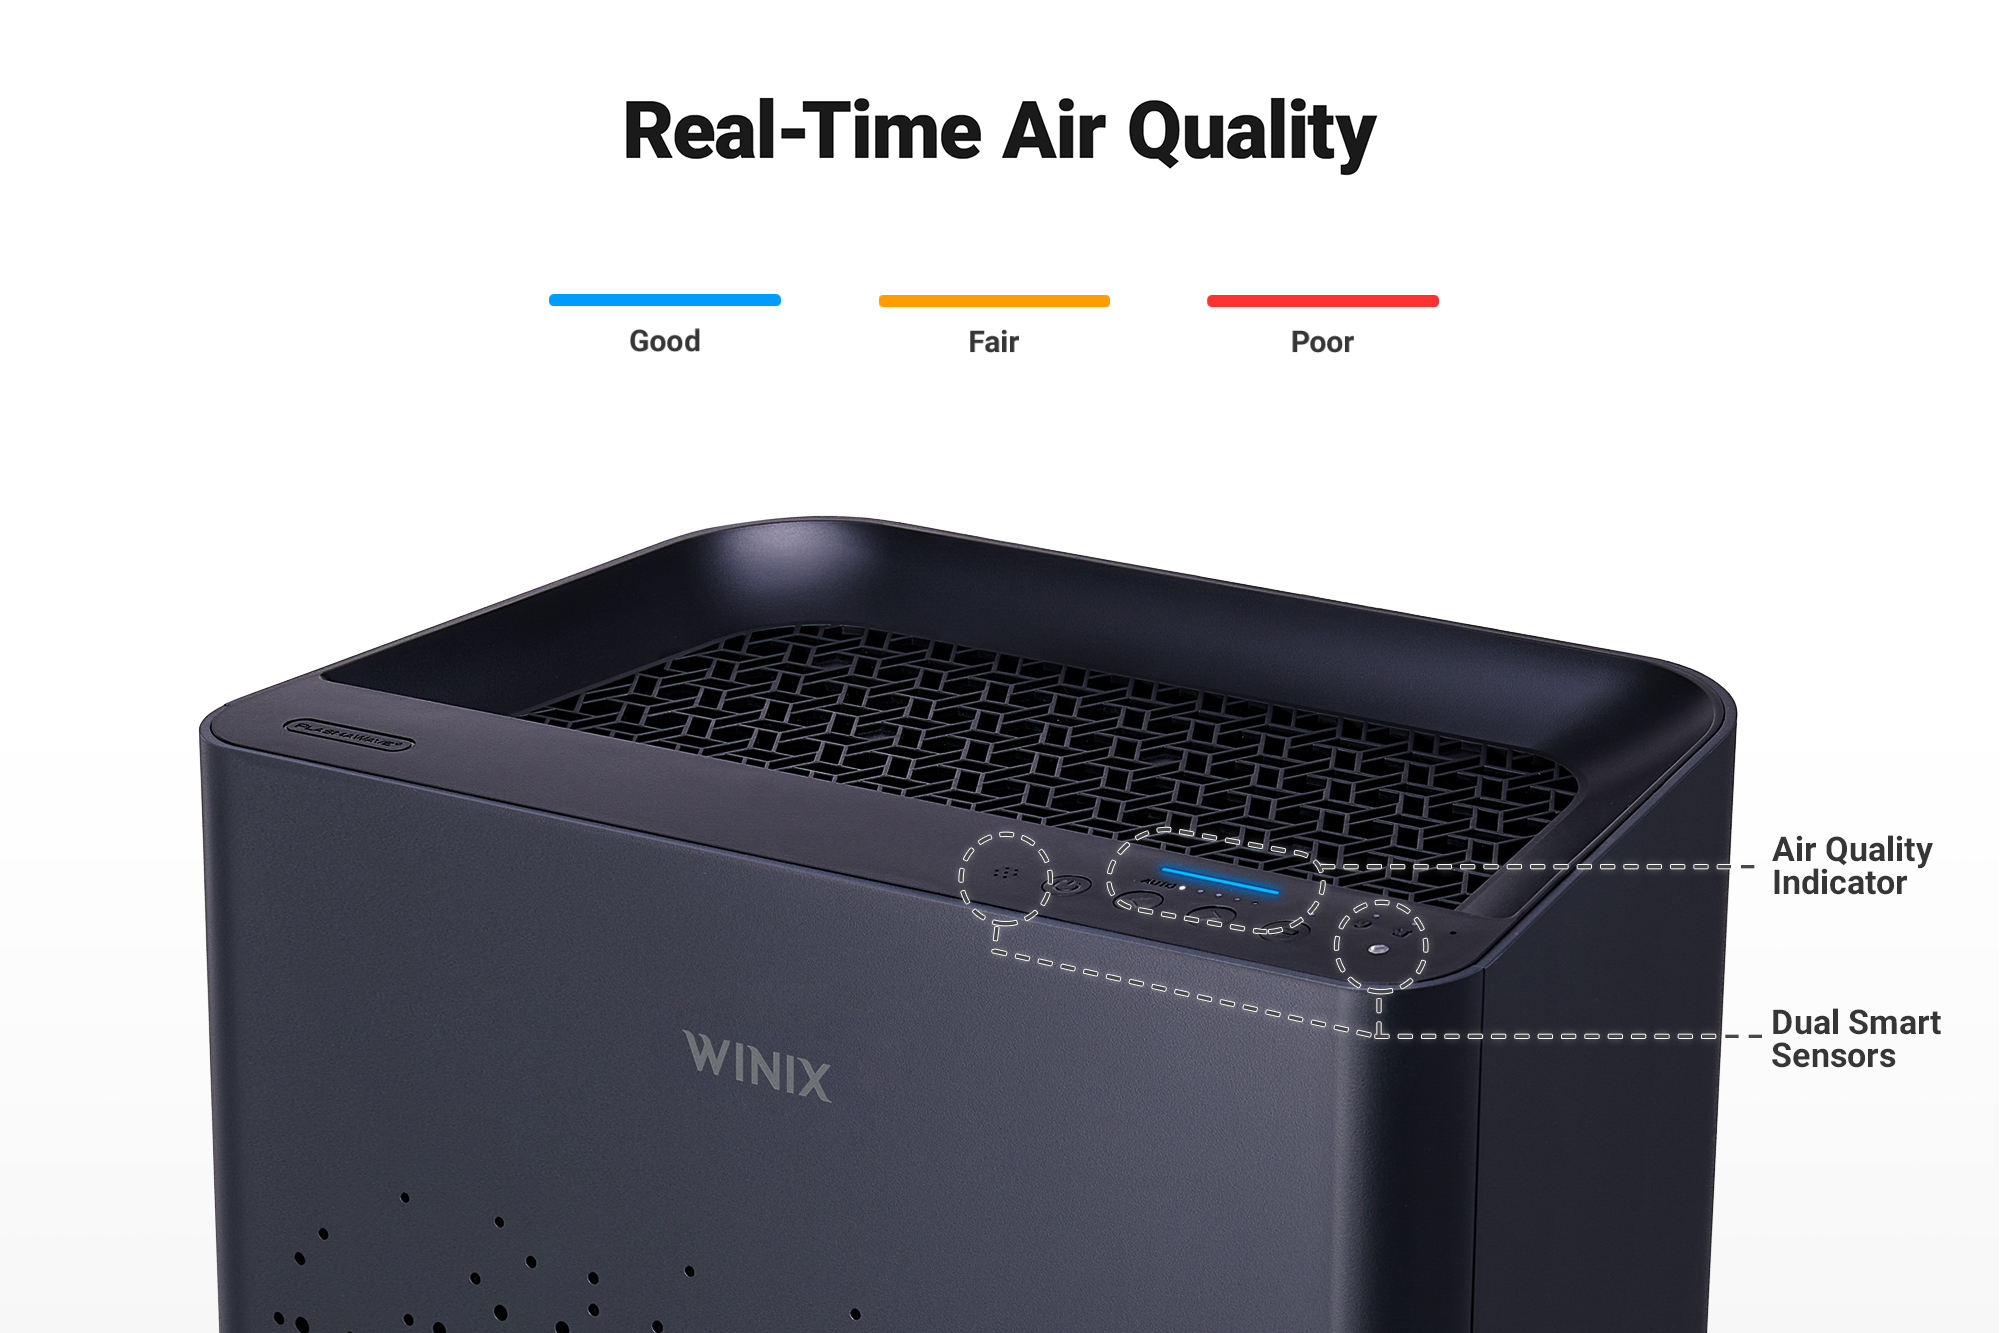 AM80 air purifier top angle with text saying Real Time Air Quality, air quality indicator, and dual Smart Sensors